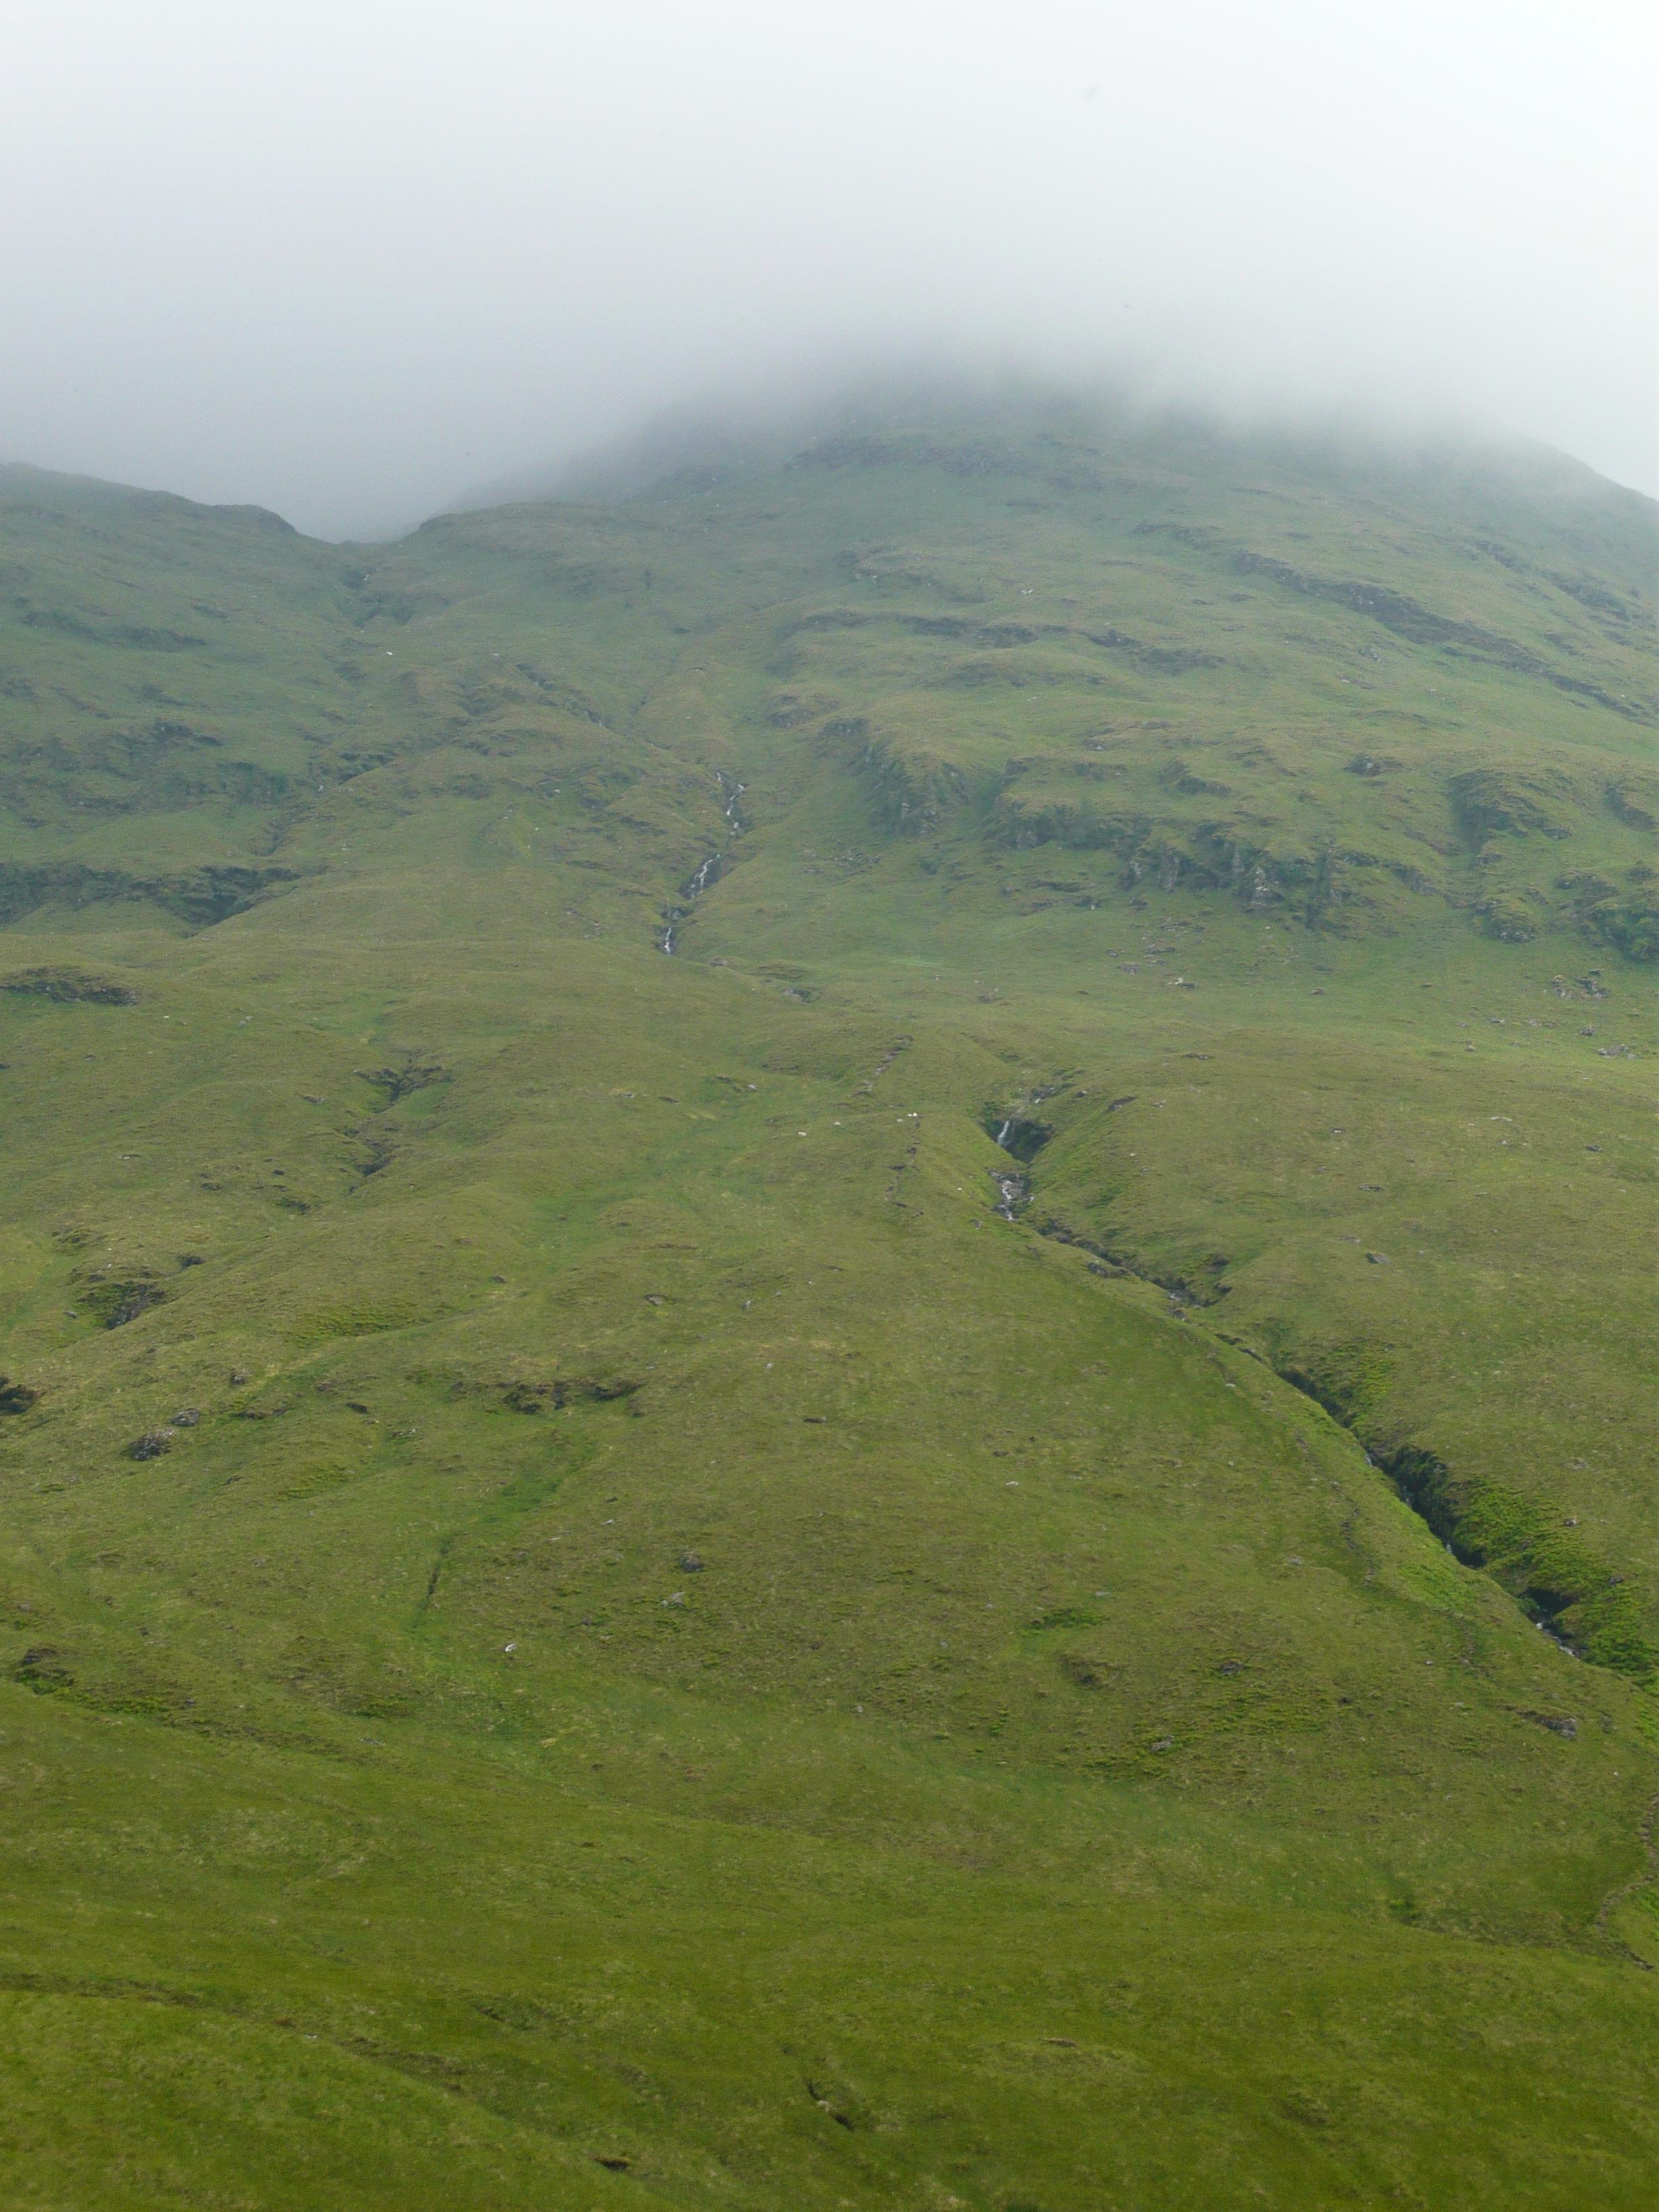 Walking up into the mist on Ben Lui